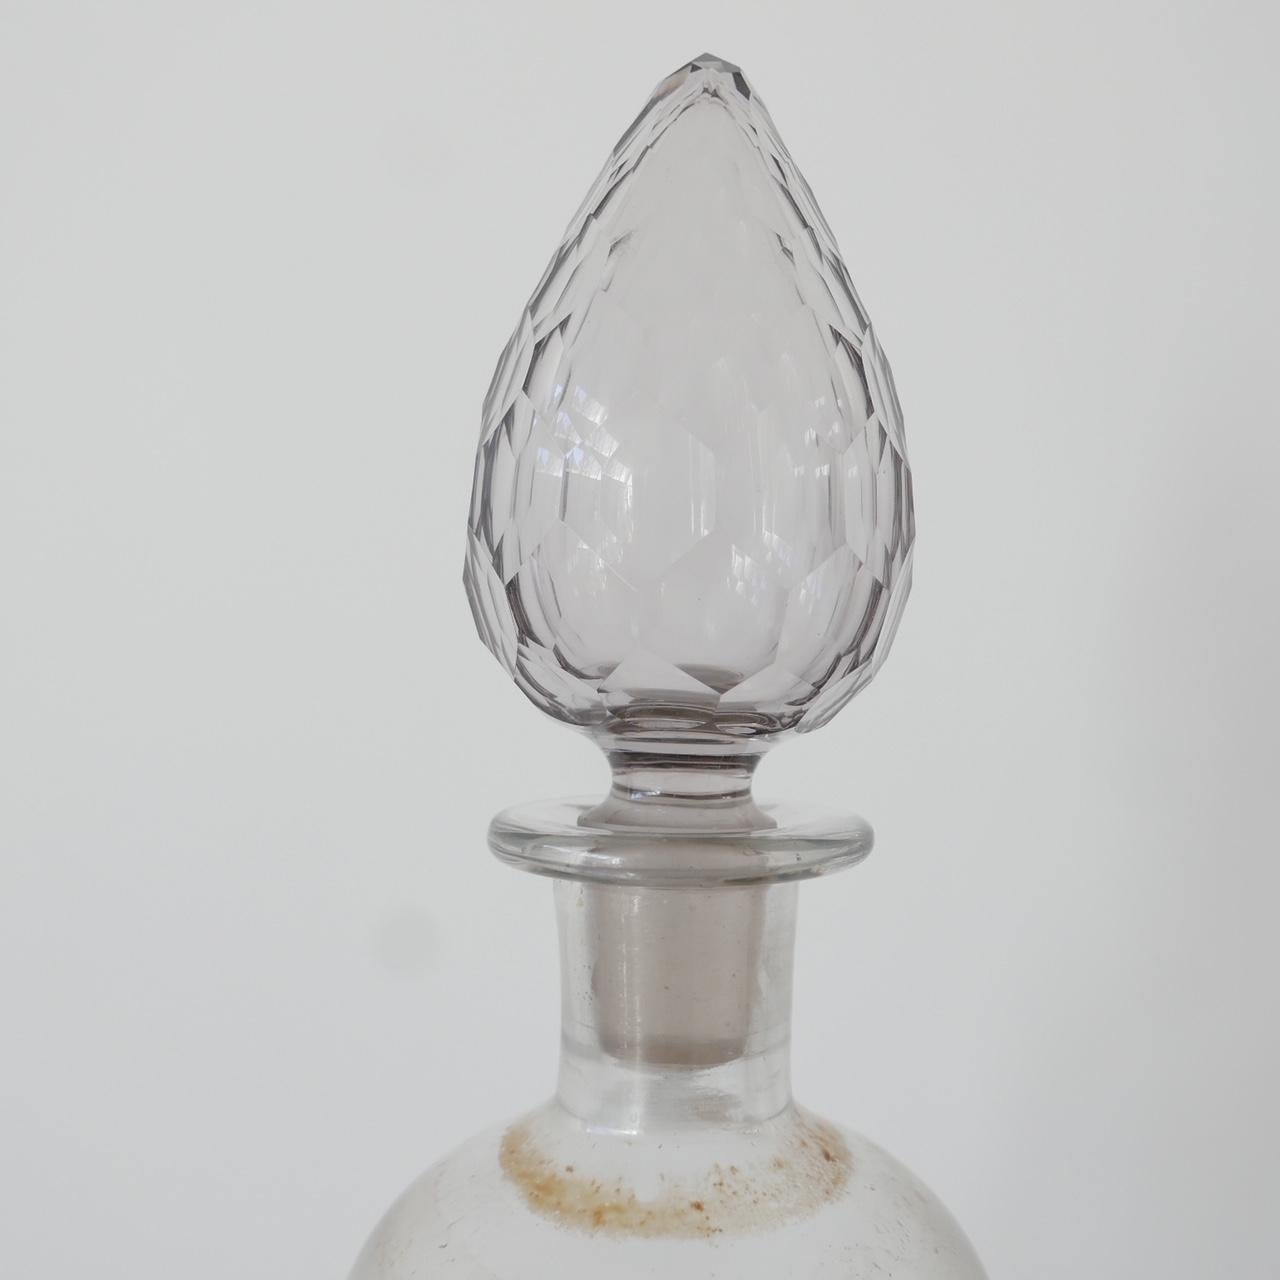 Antique Glass Apothecary Carboy Advertising Jar 1